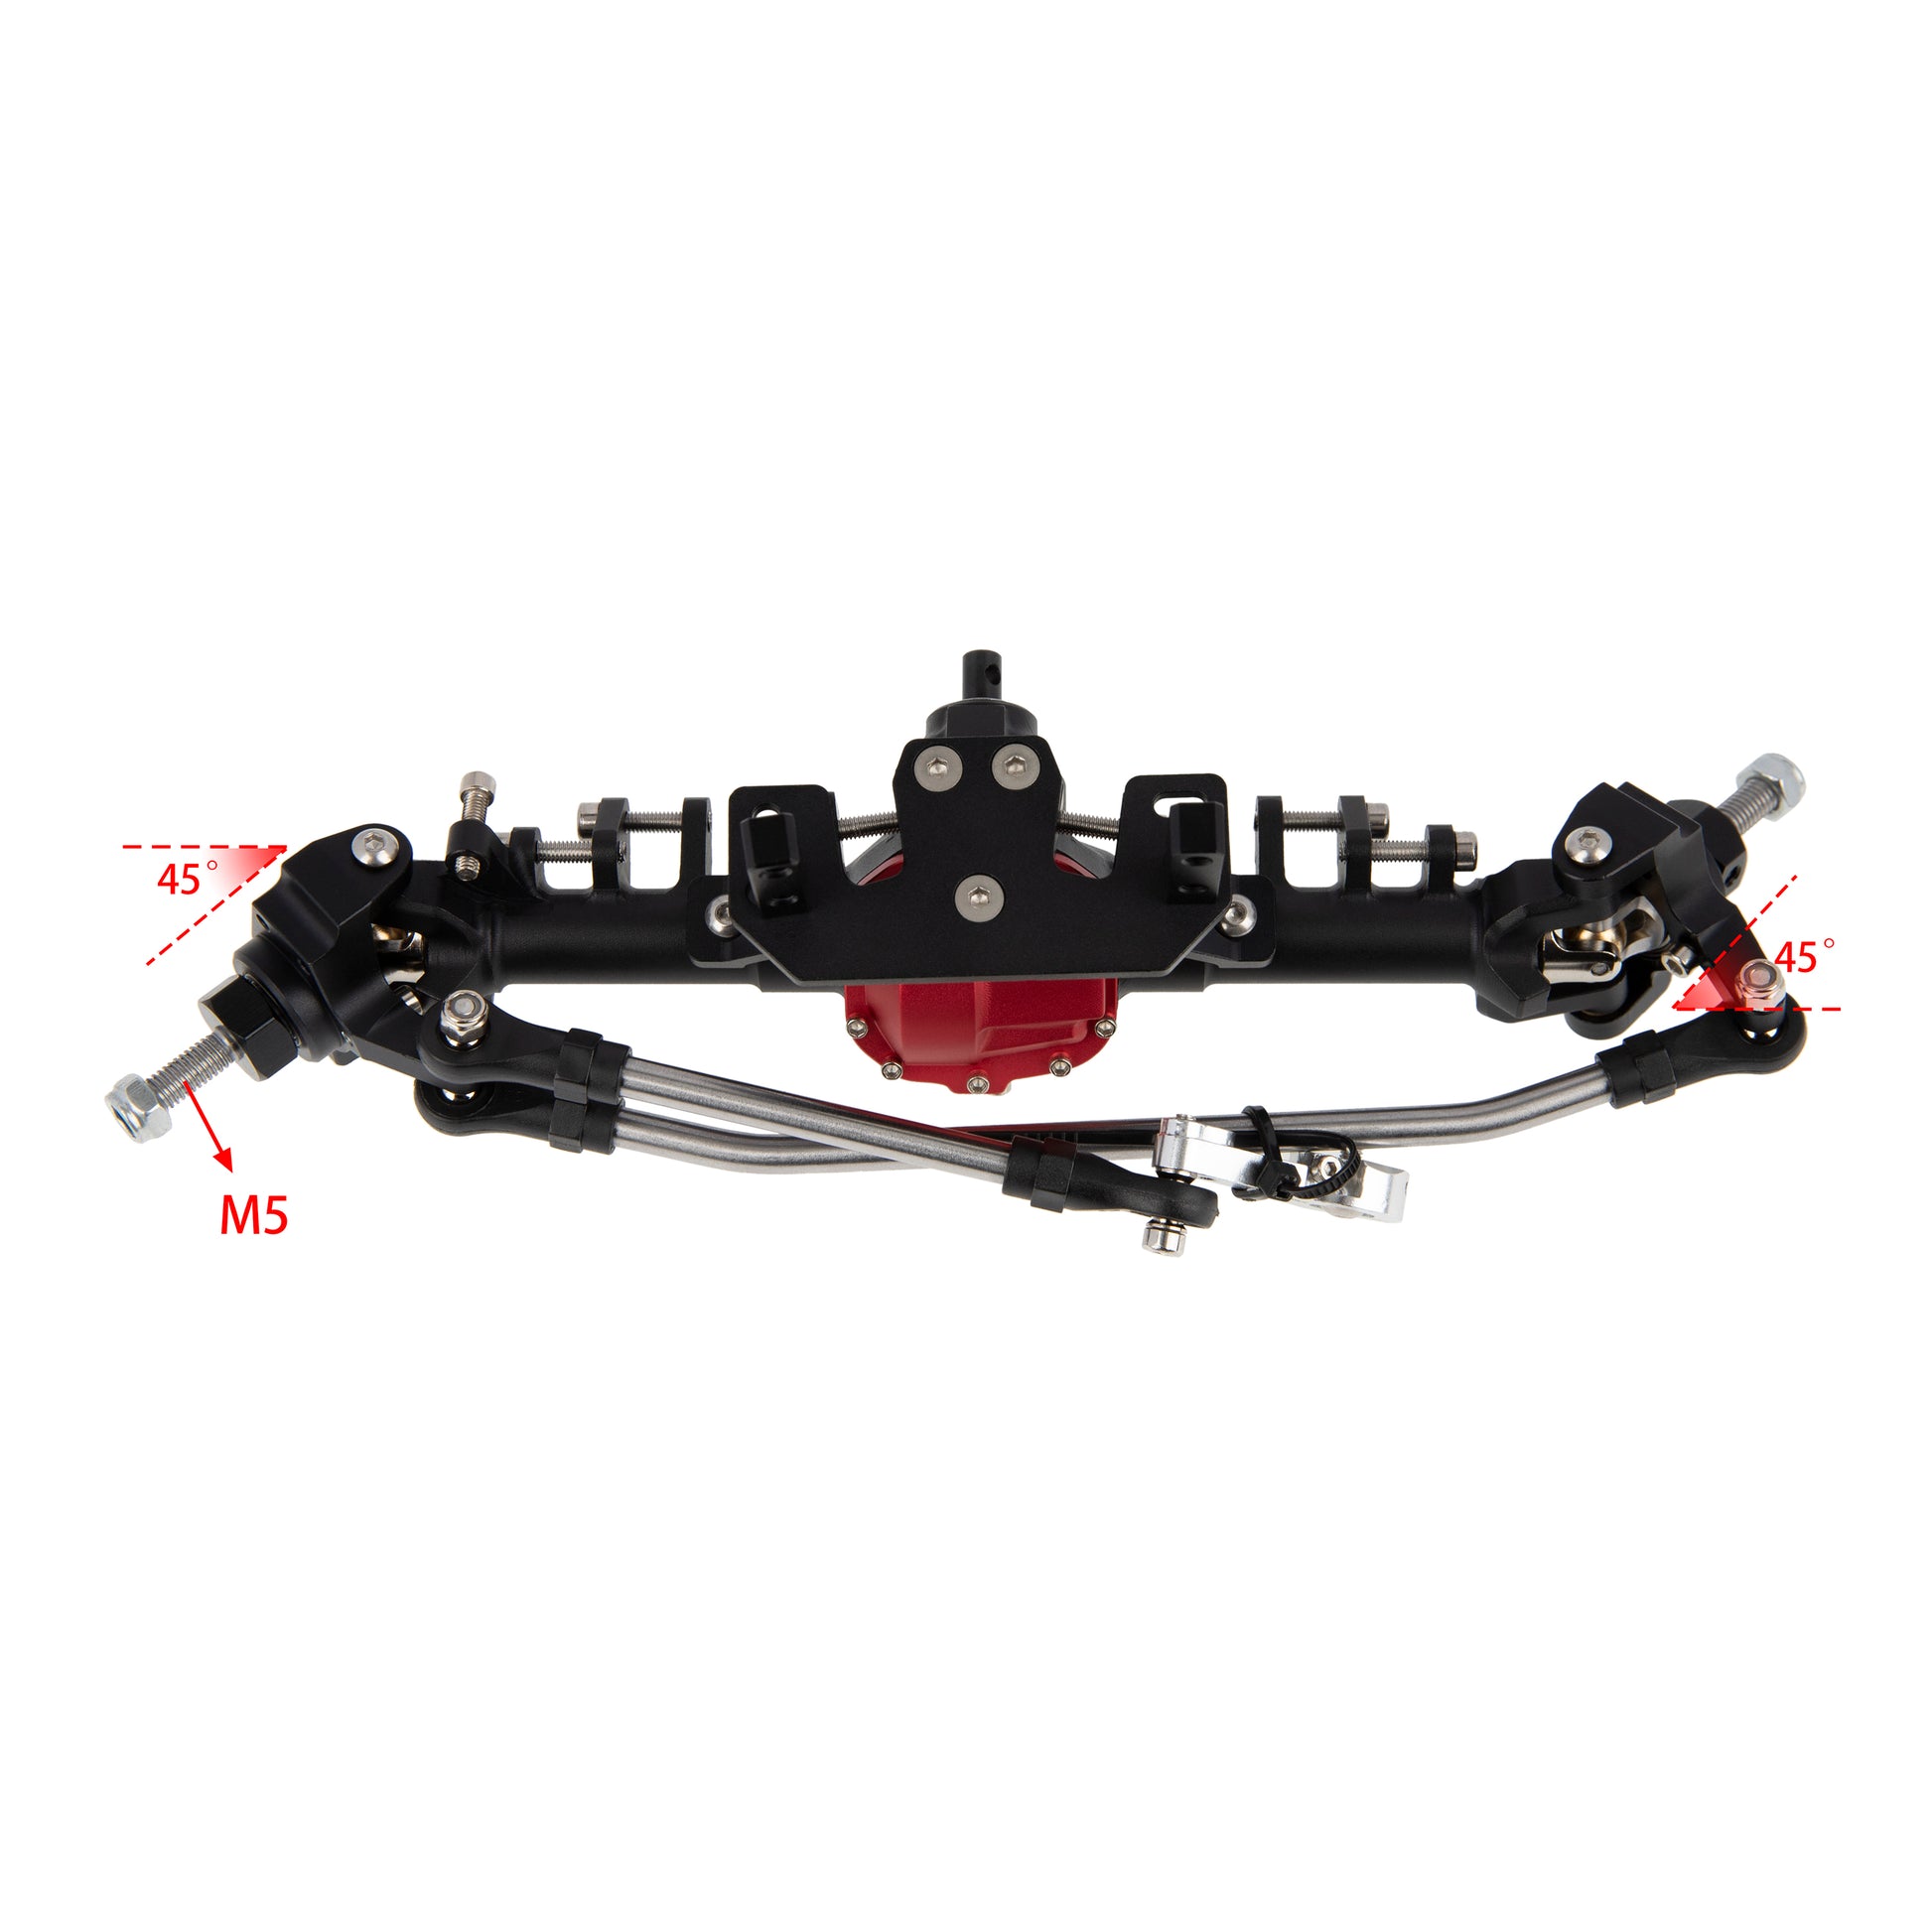 Metal Large Steering Integrated Axle Front Axle for Axial SCX10